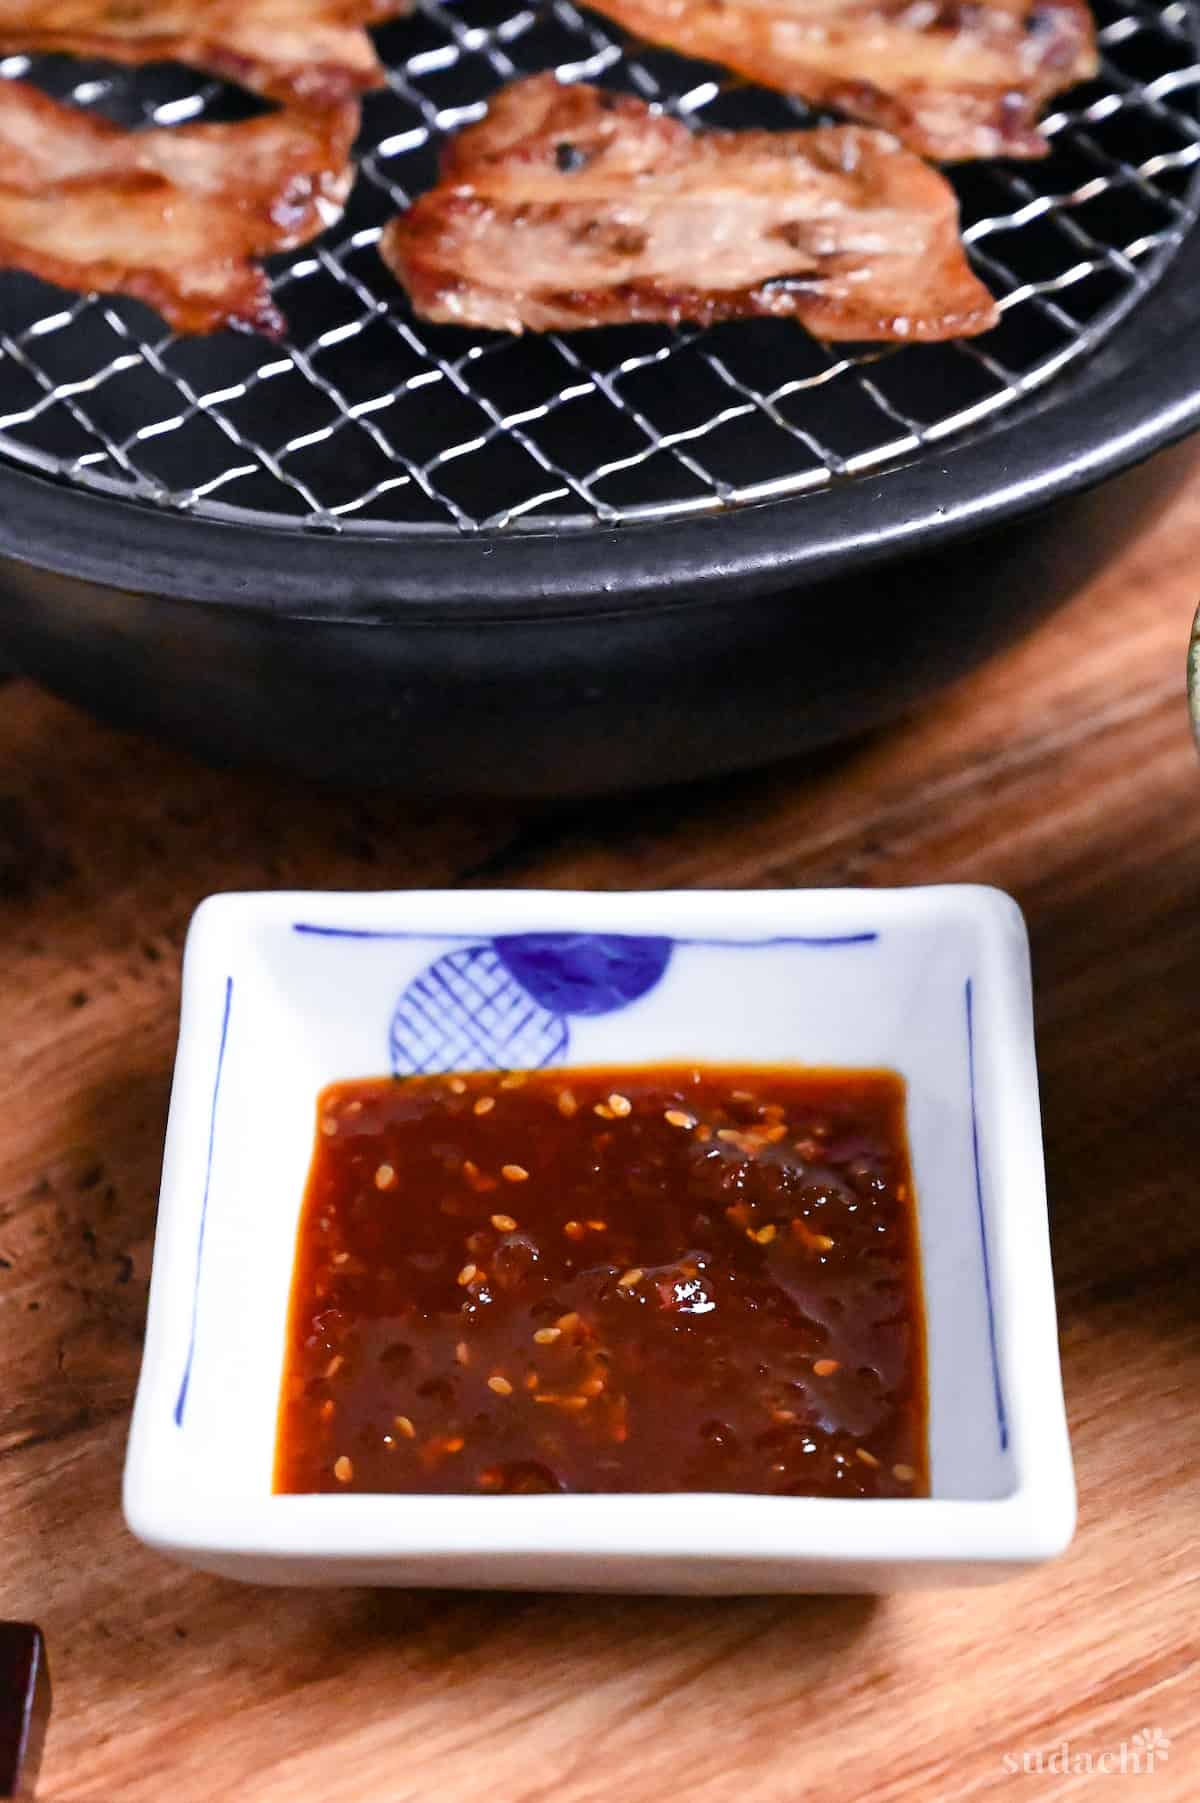 Homemade Japanese yakiniku sauce in a small square white bowl with blue border next to slices of thinly sliced beef on a metal grill